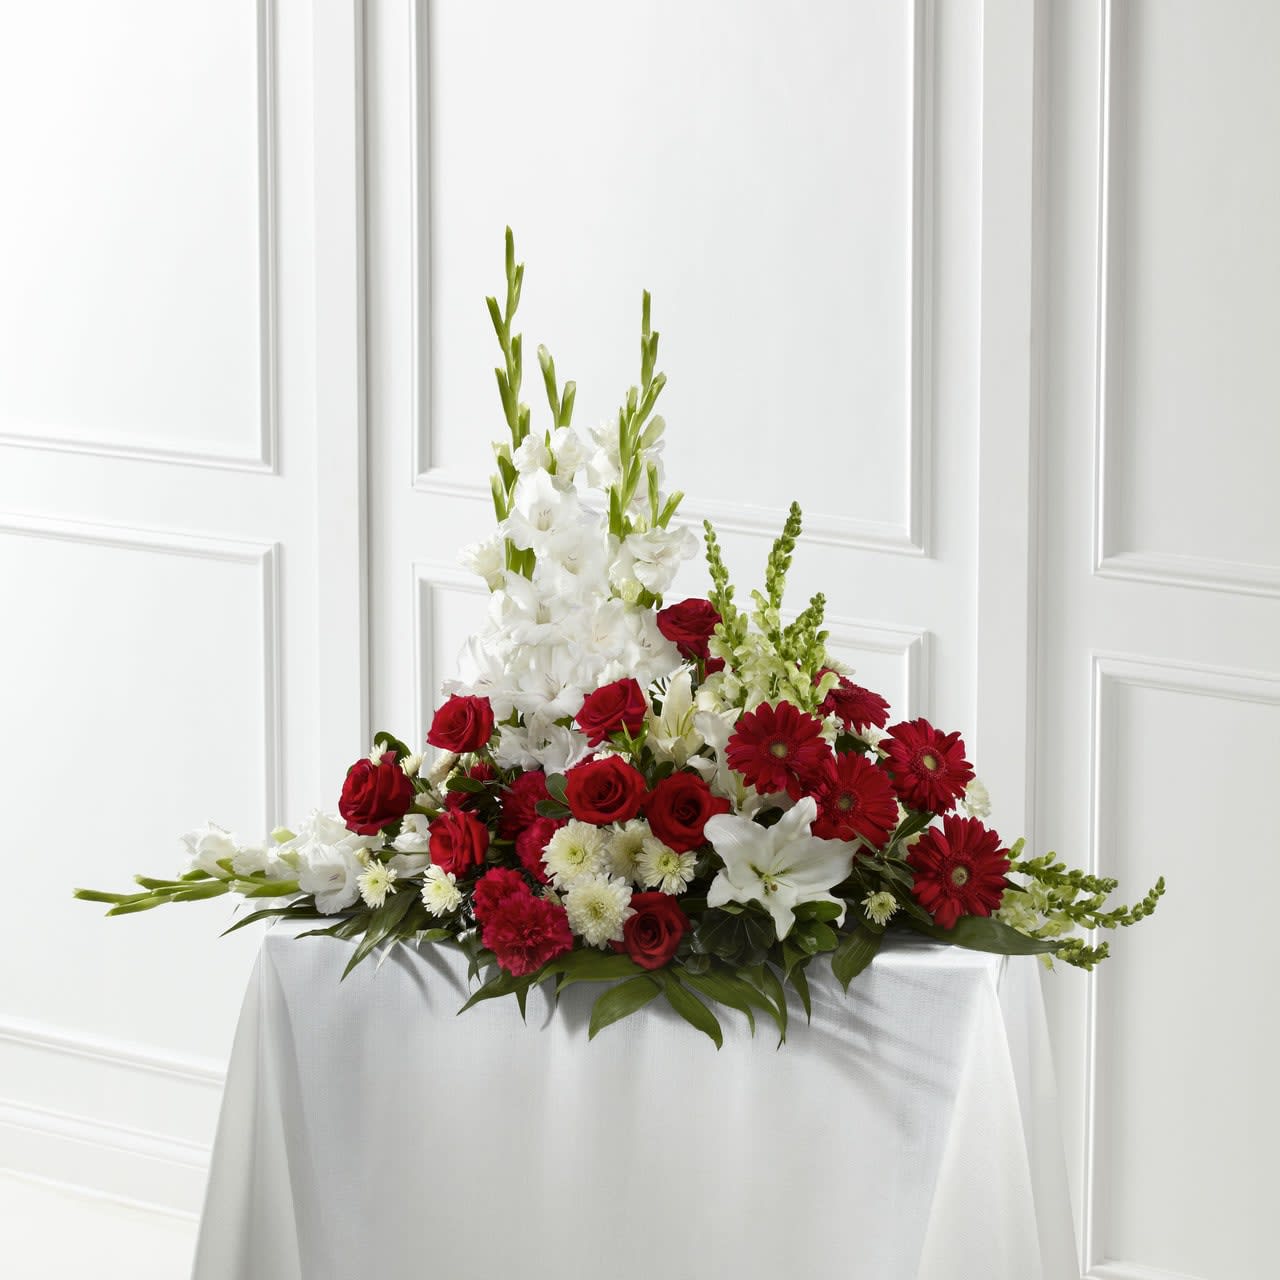 SAFF The Crimson &amp; White Arrangement - The Crimson &amp; White Arrangement is a lovely symbol of peace and love. Red roses, carnations and gerbera daisies pop against the white blooms of gladiolus, snapdragons, Oriental lilies and chrysanthemums. Accented with a variety of lush, vibrant greens, this exquisite arrangement is a beautiful tribute to the deceased. Approximately 30&quot;H x 40&quot;W.  Your purchase includes a complimentary personalized gift message.